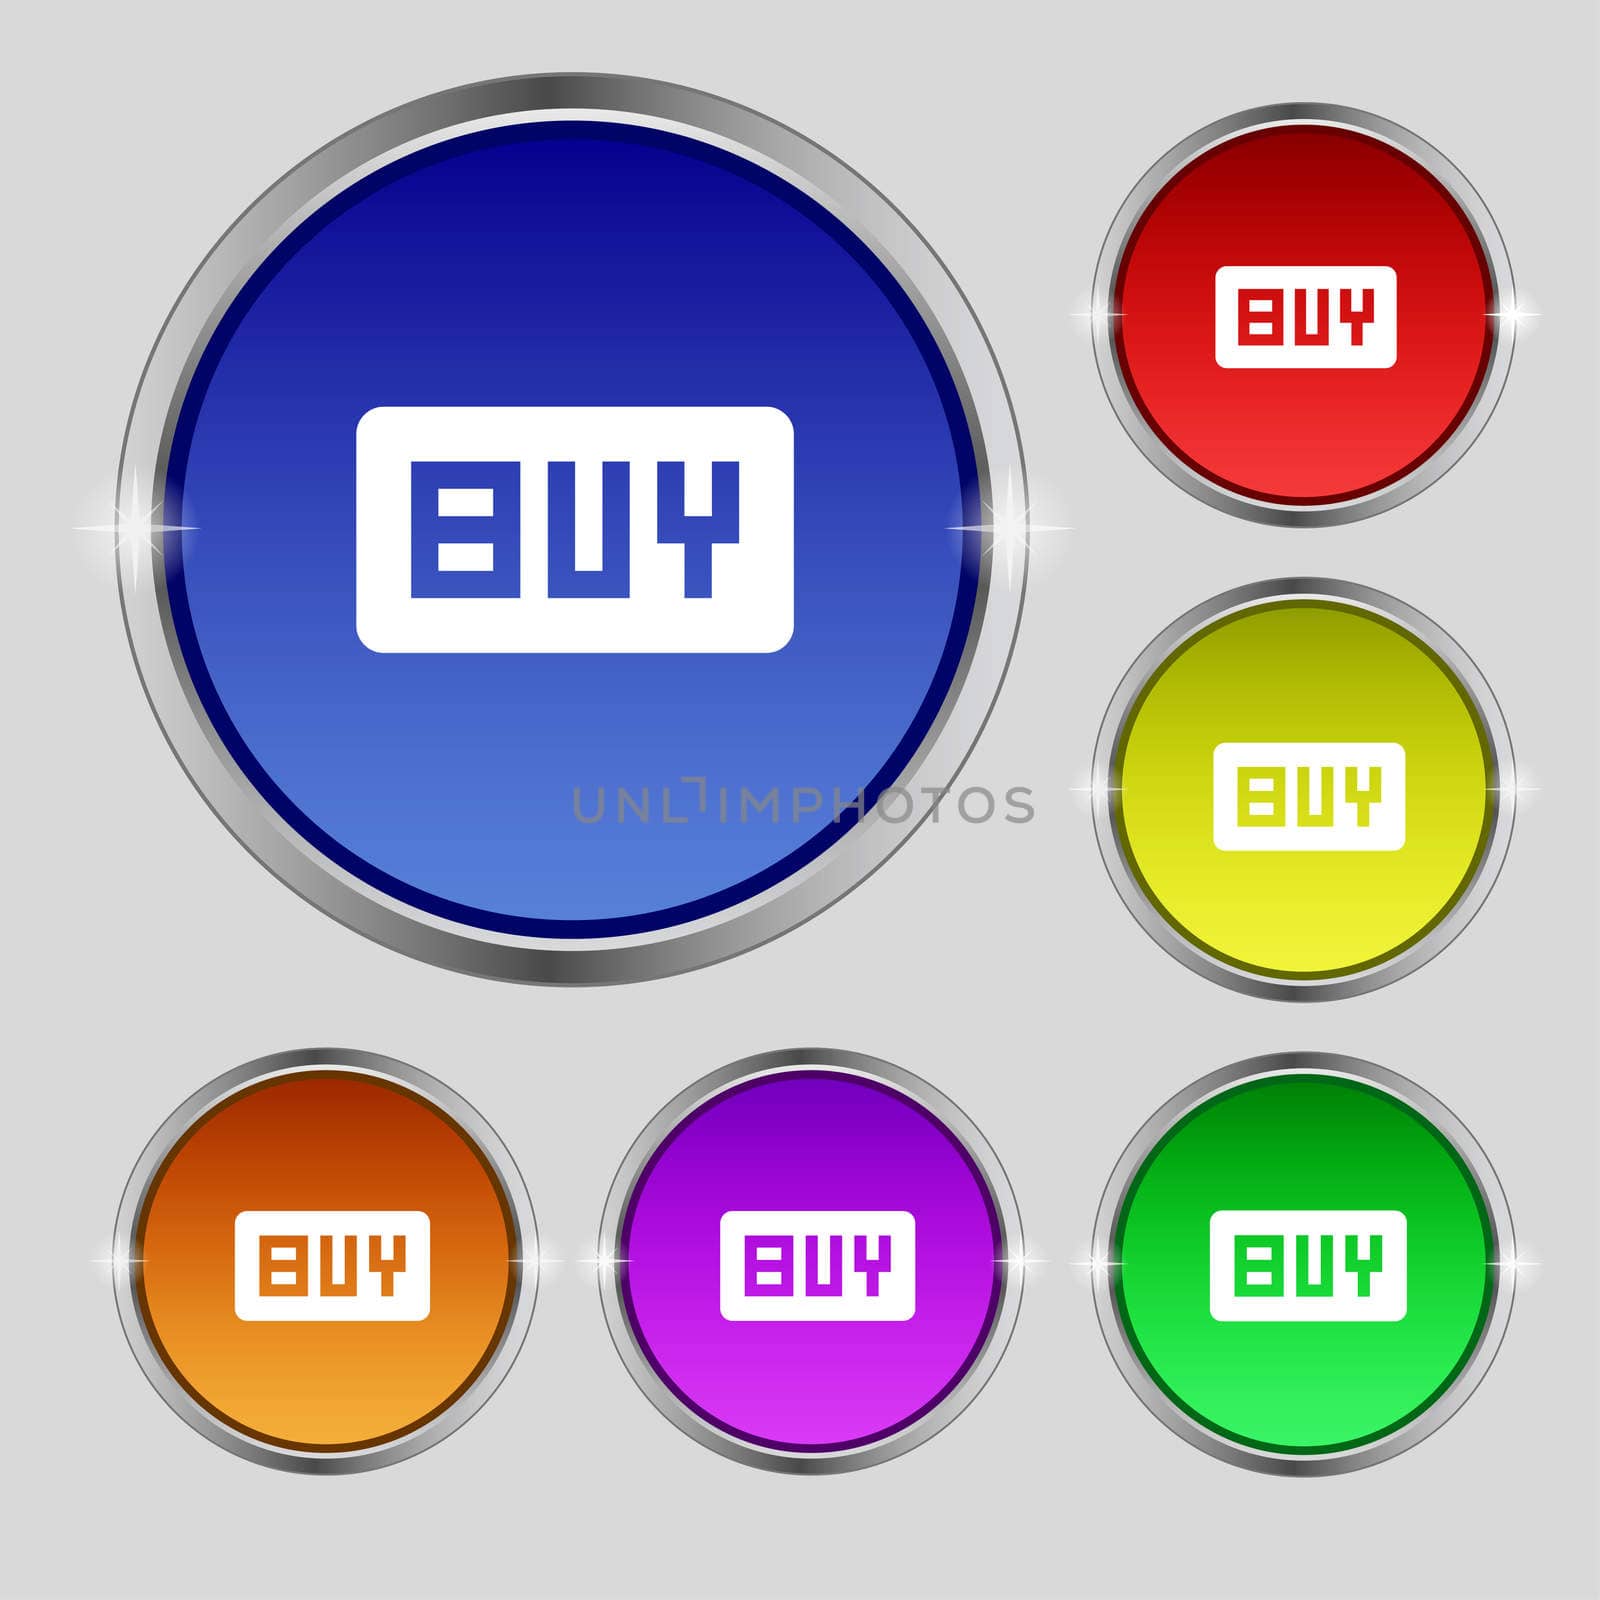 Buy, Online buying dollar usd icon sign. Round symbol on bright colourful buttons. illustration